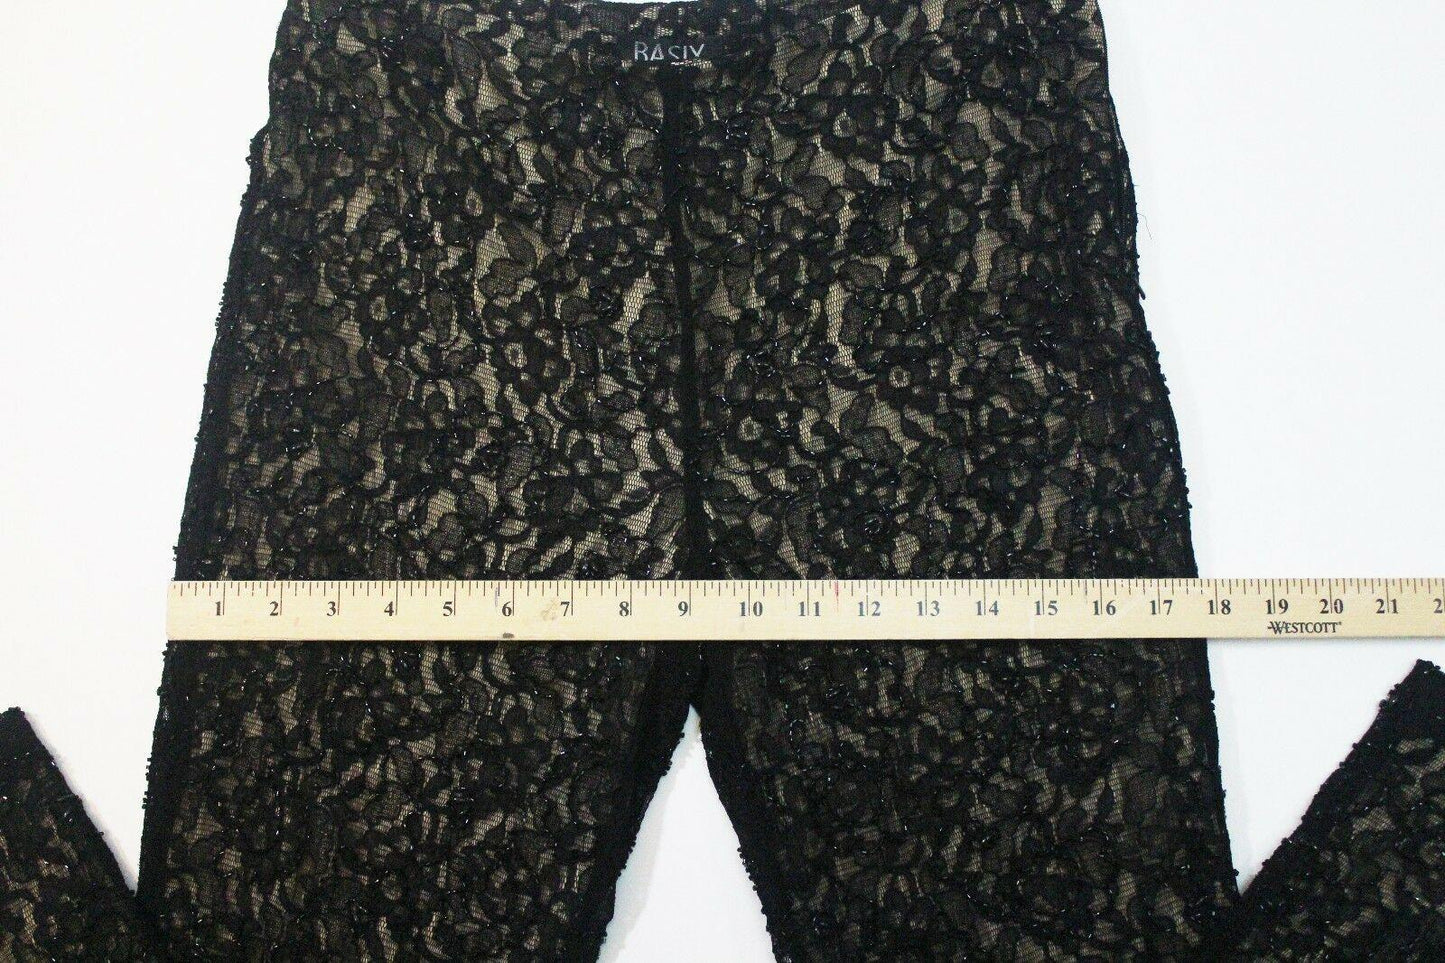 Basix Black Label Black Hand Beaded lace With beige lining Pants Size 6 - SVNYFancy